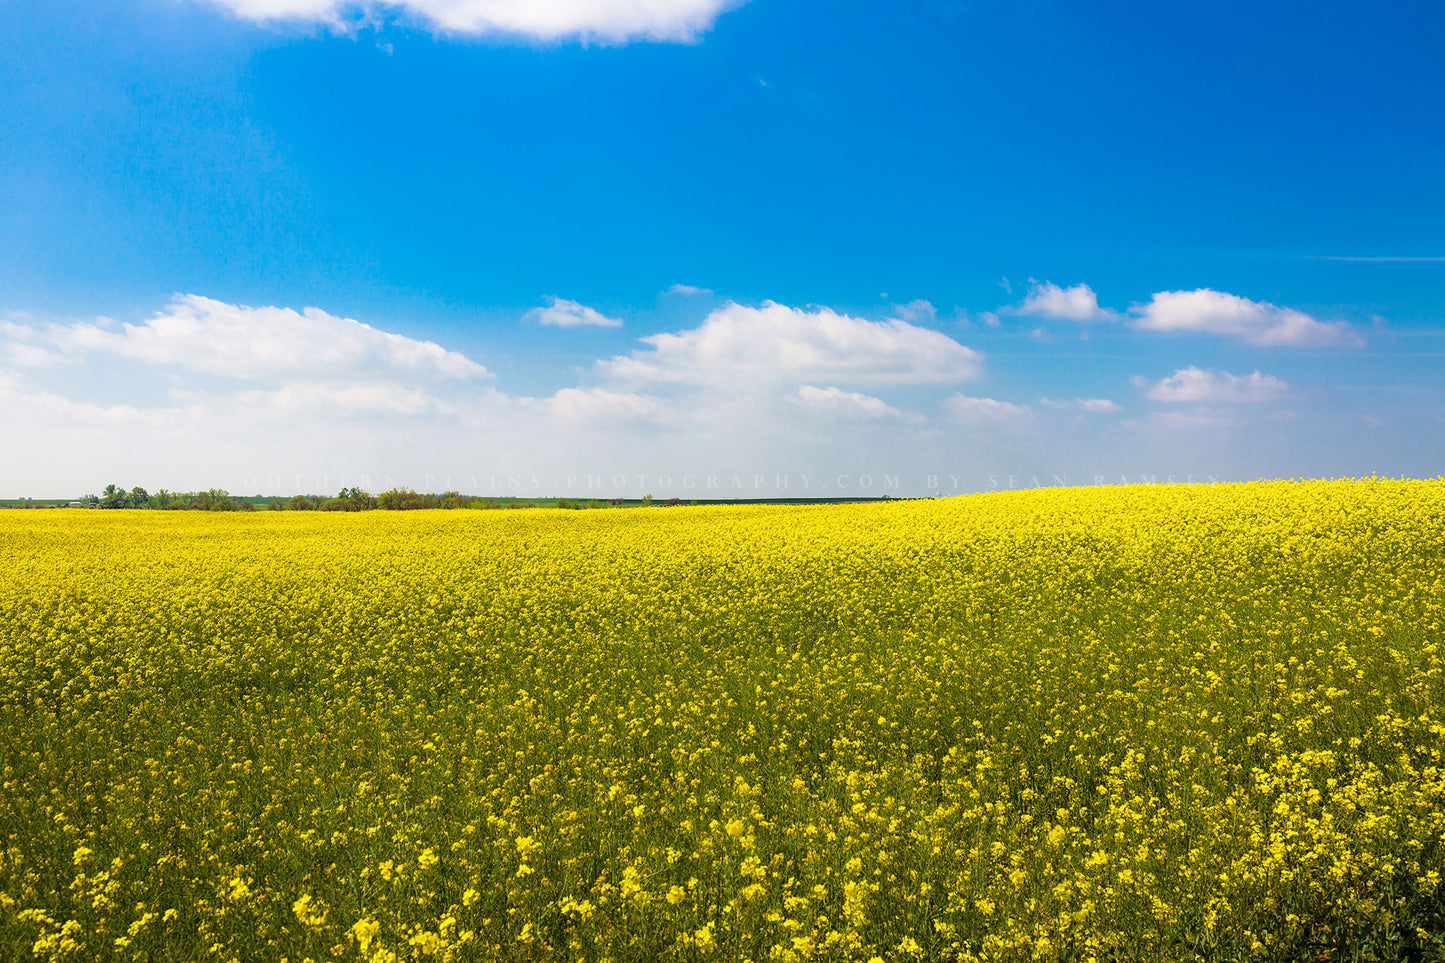 Country photography print of rolling canola fields under a dreamy blue sky with white clouds on a spring day in Oklahoma by Sean Ramsey of Southern Plains Photography.